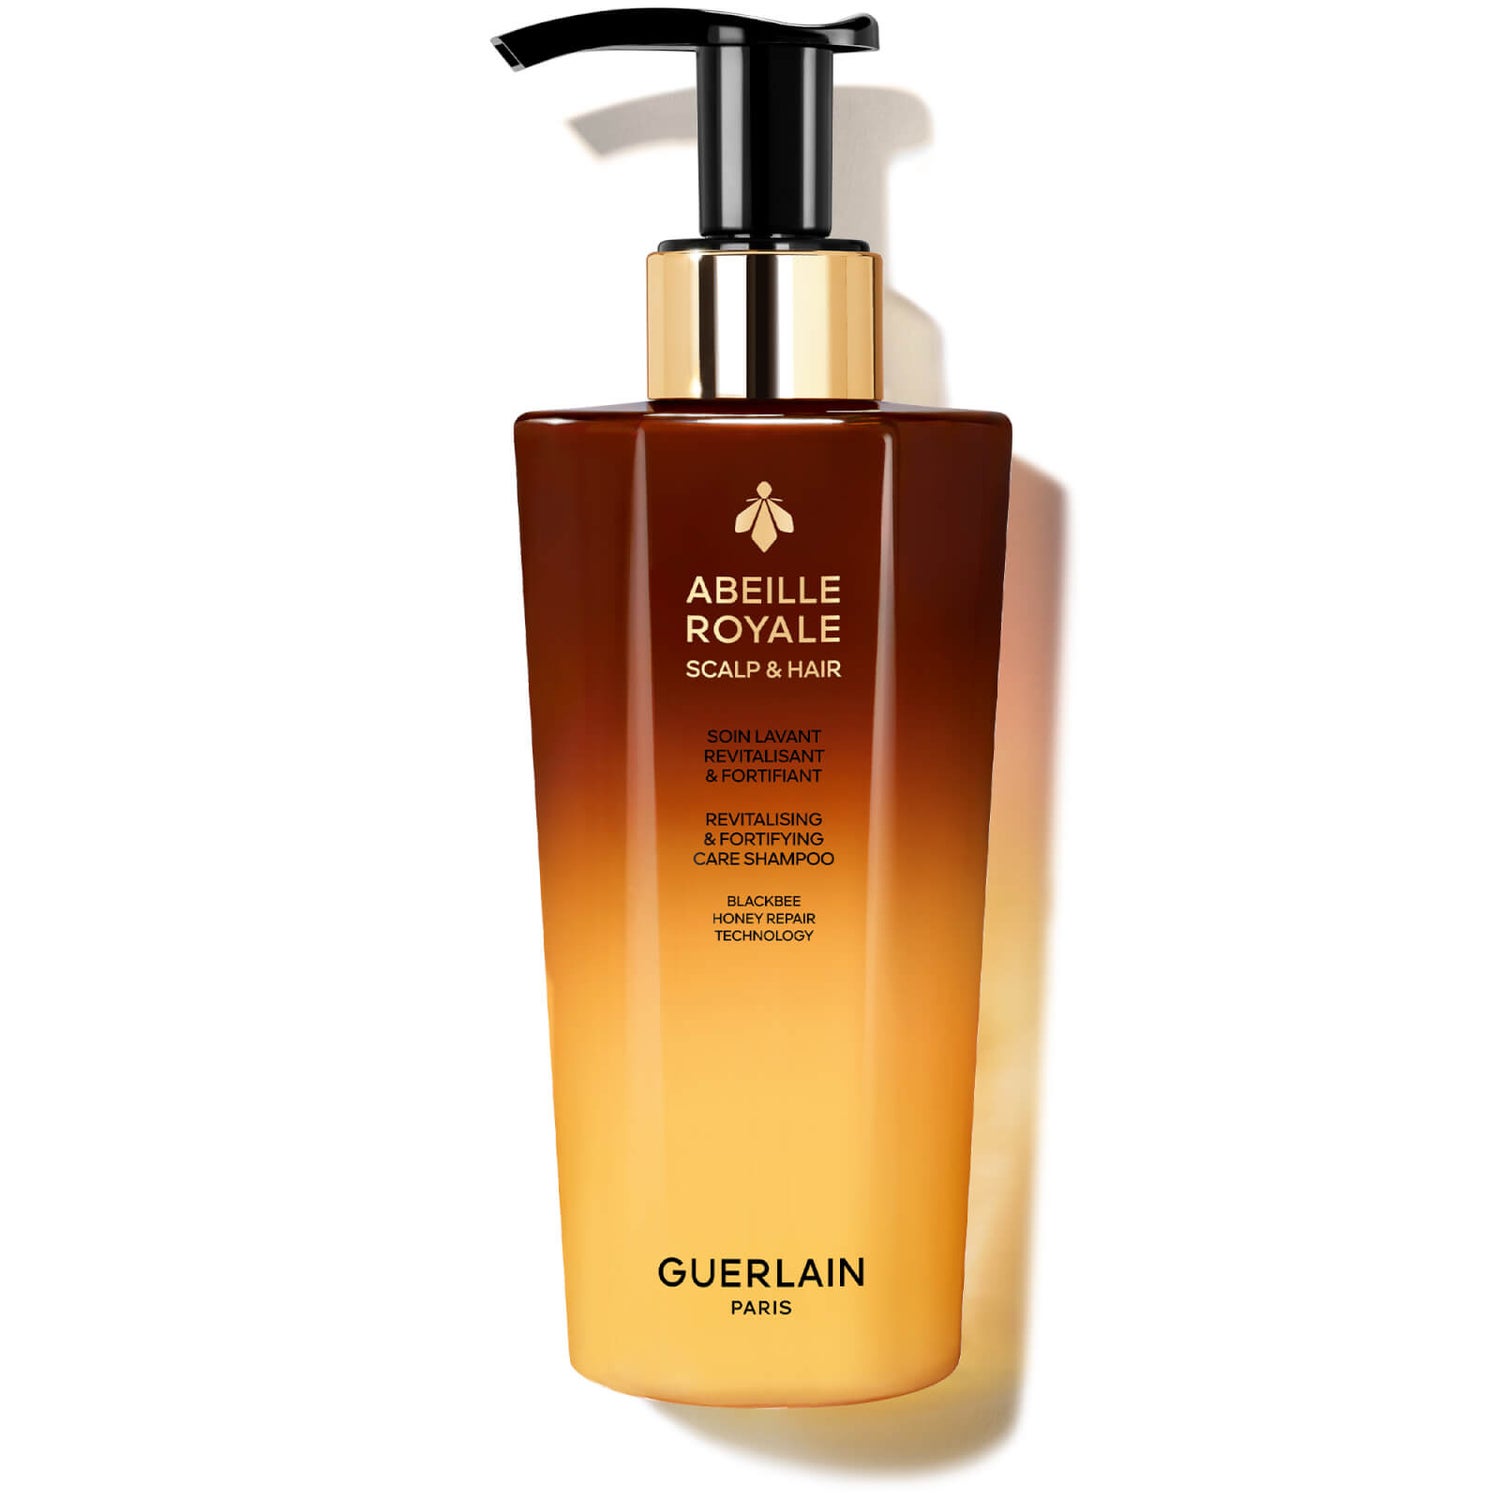 GUERLAIN Exclusive Abeille Royale Revitalising and Fortifying Care Shampoo 290ml